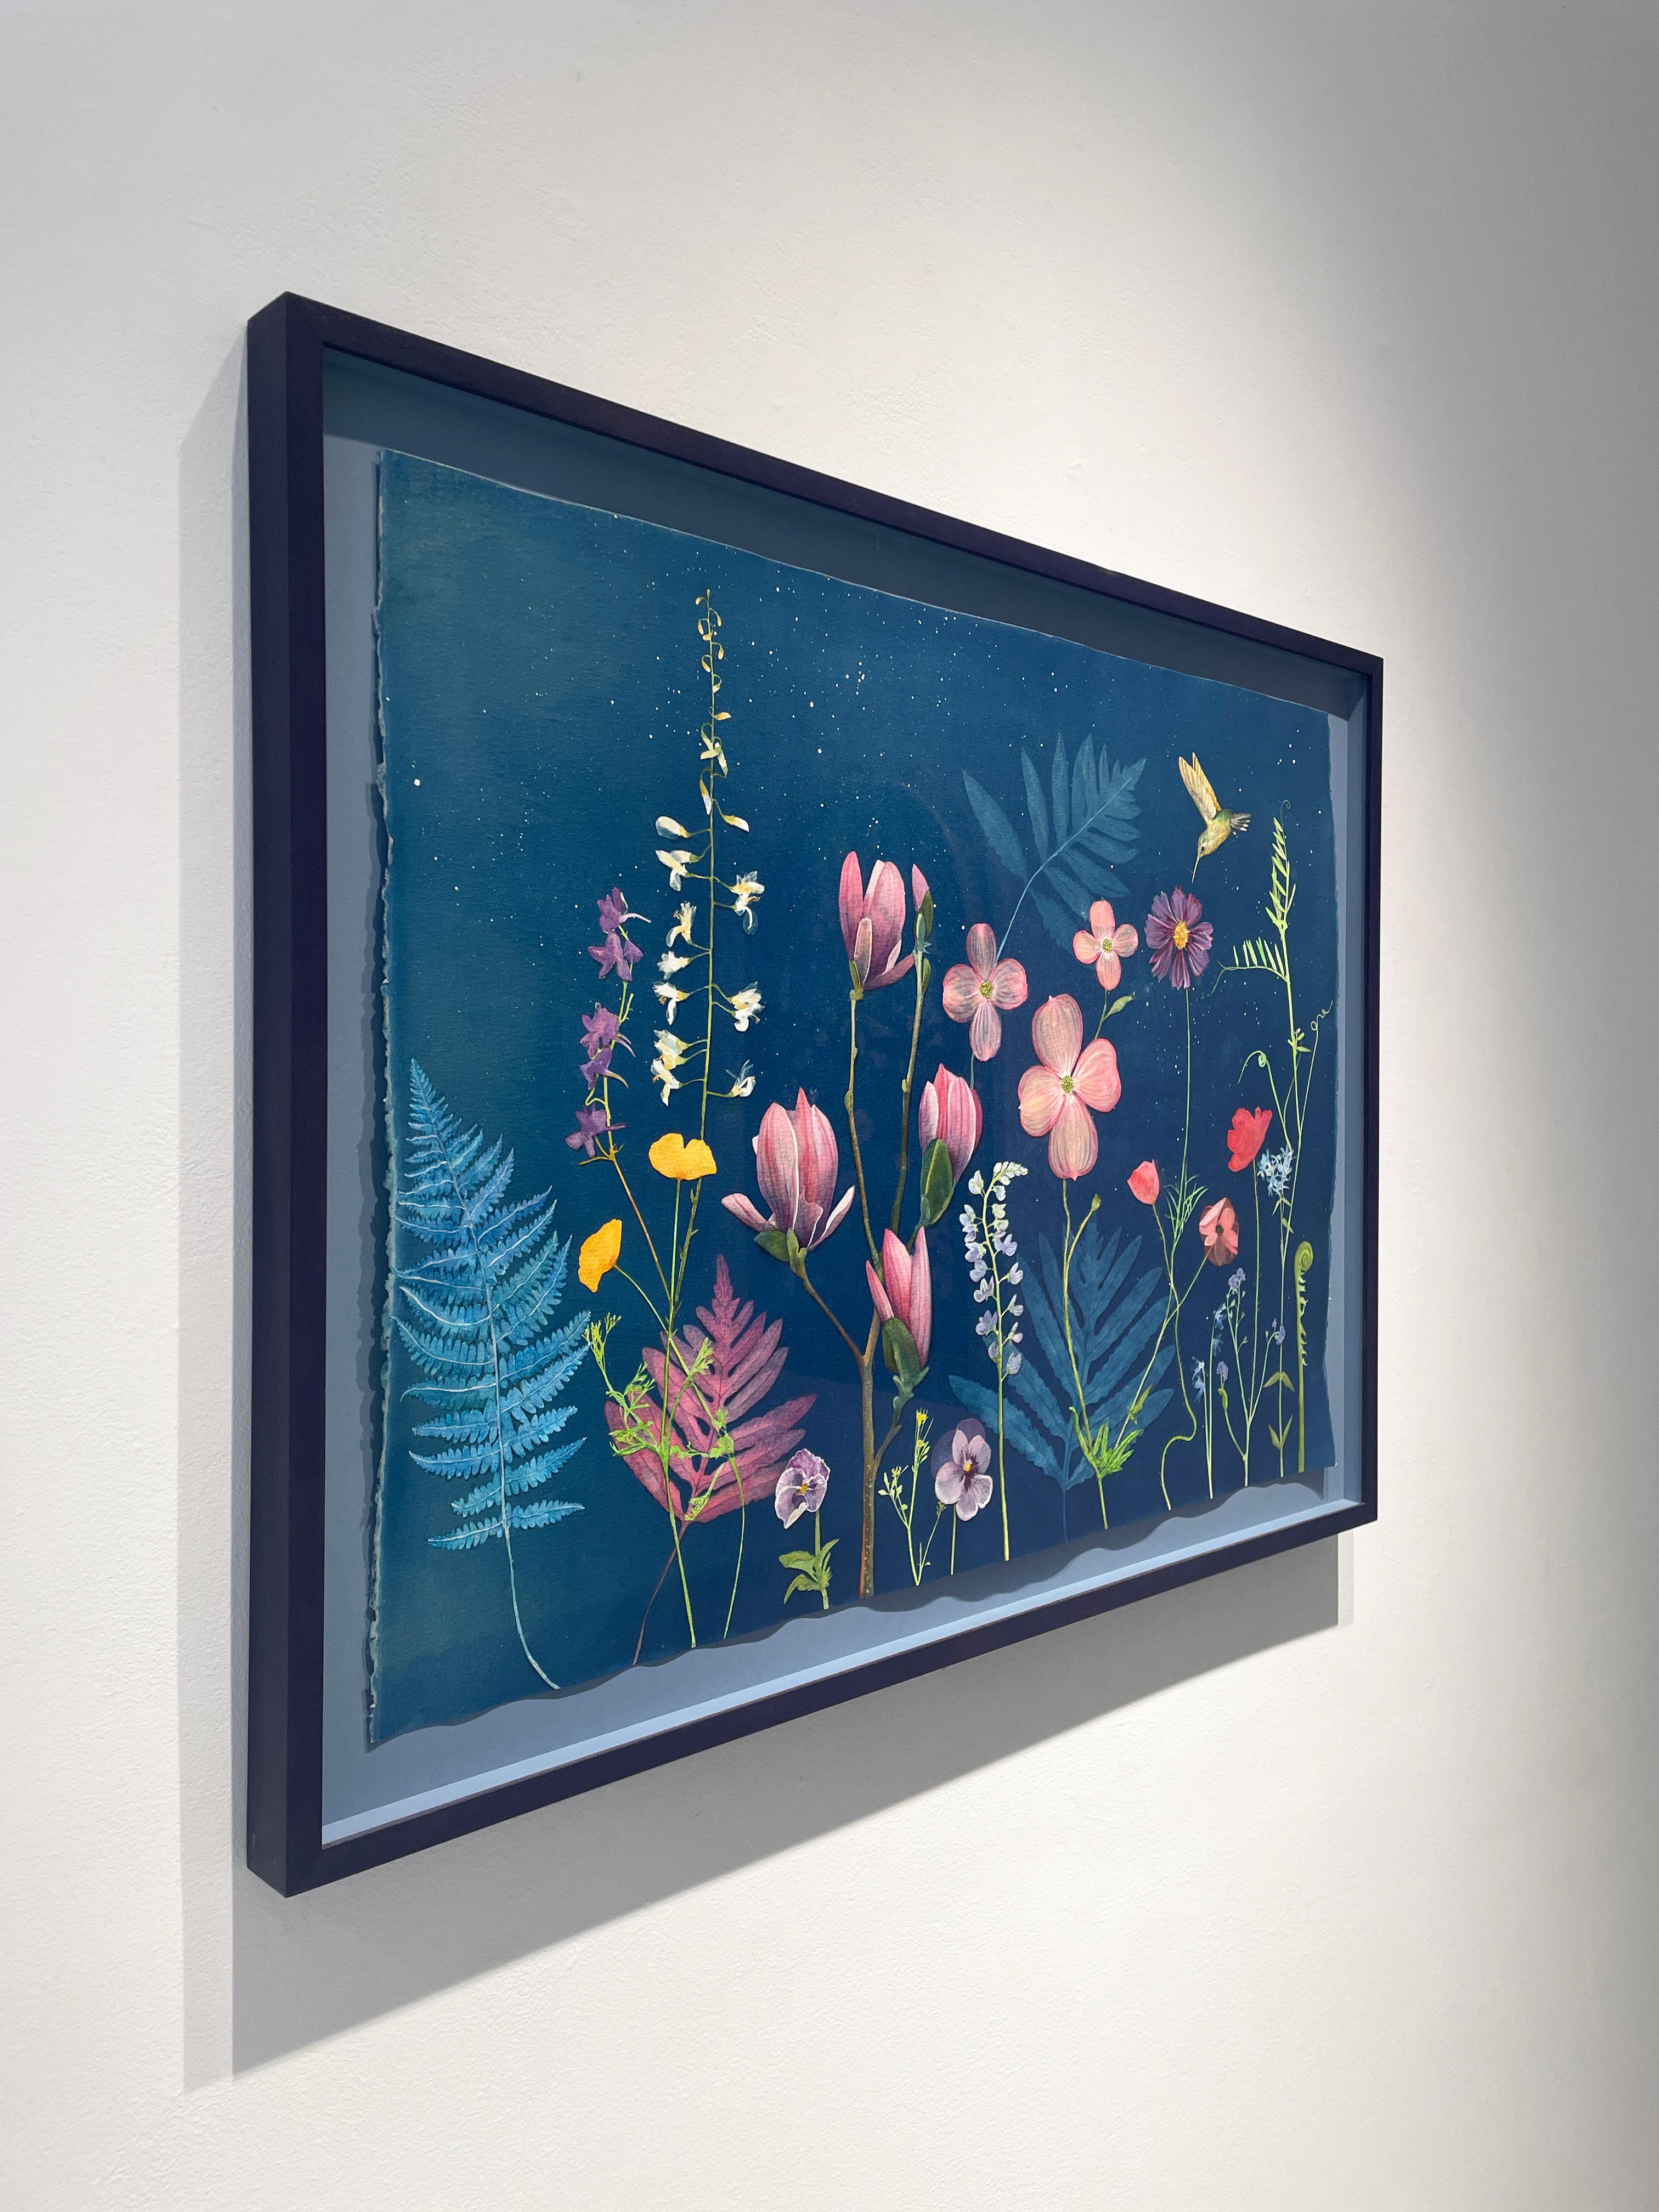 Realistic still life painting of colorful flowers and hummingbird on dark blue
Hand-painted cyanotype by Julia Whitney Barnes
